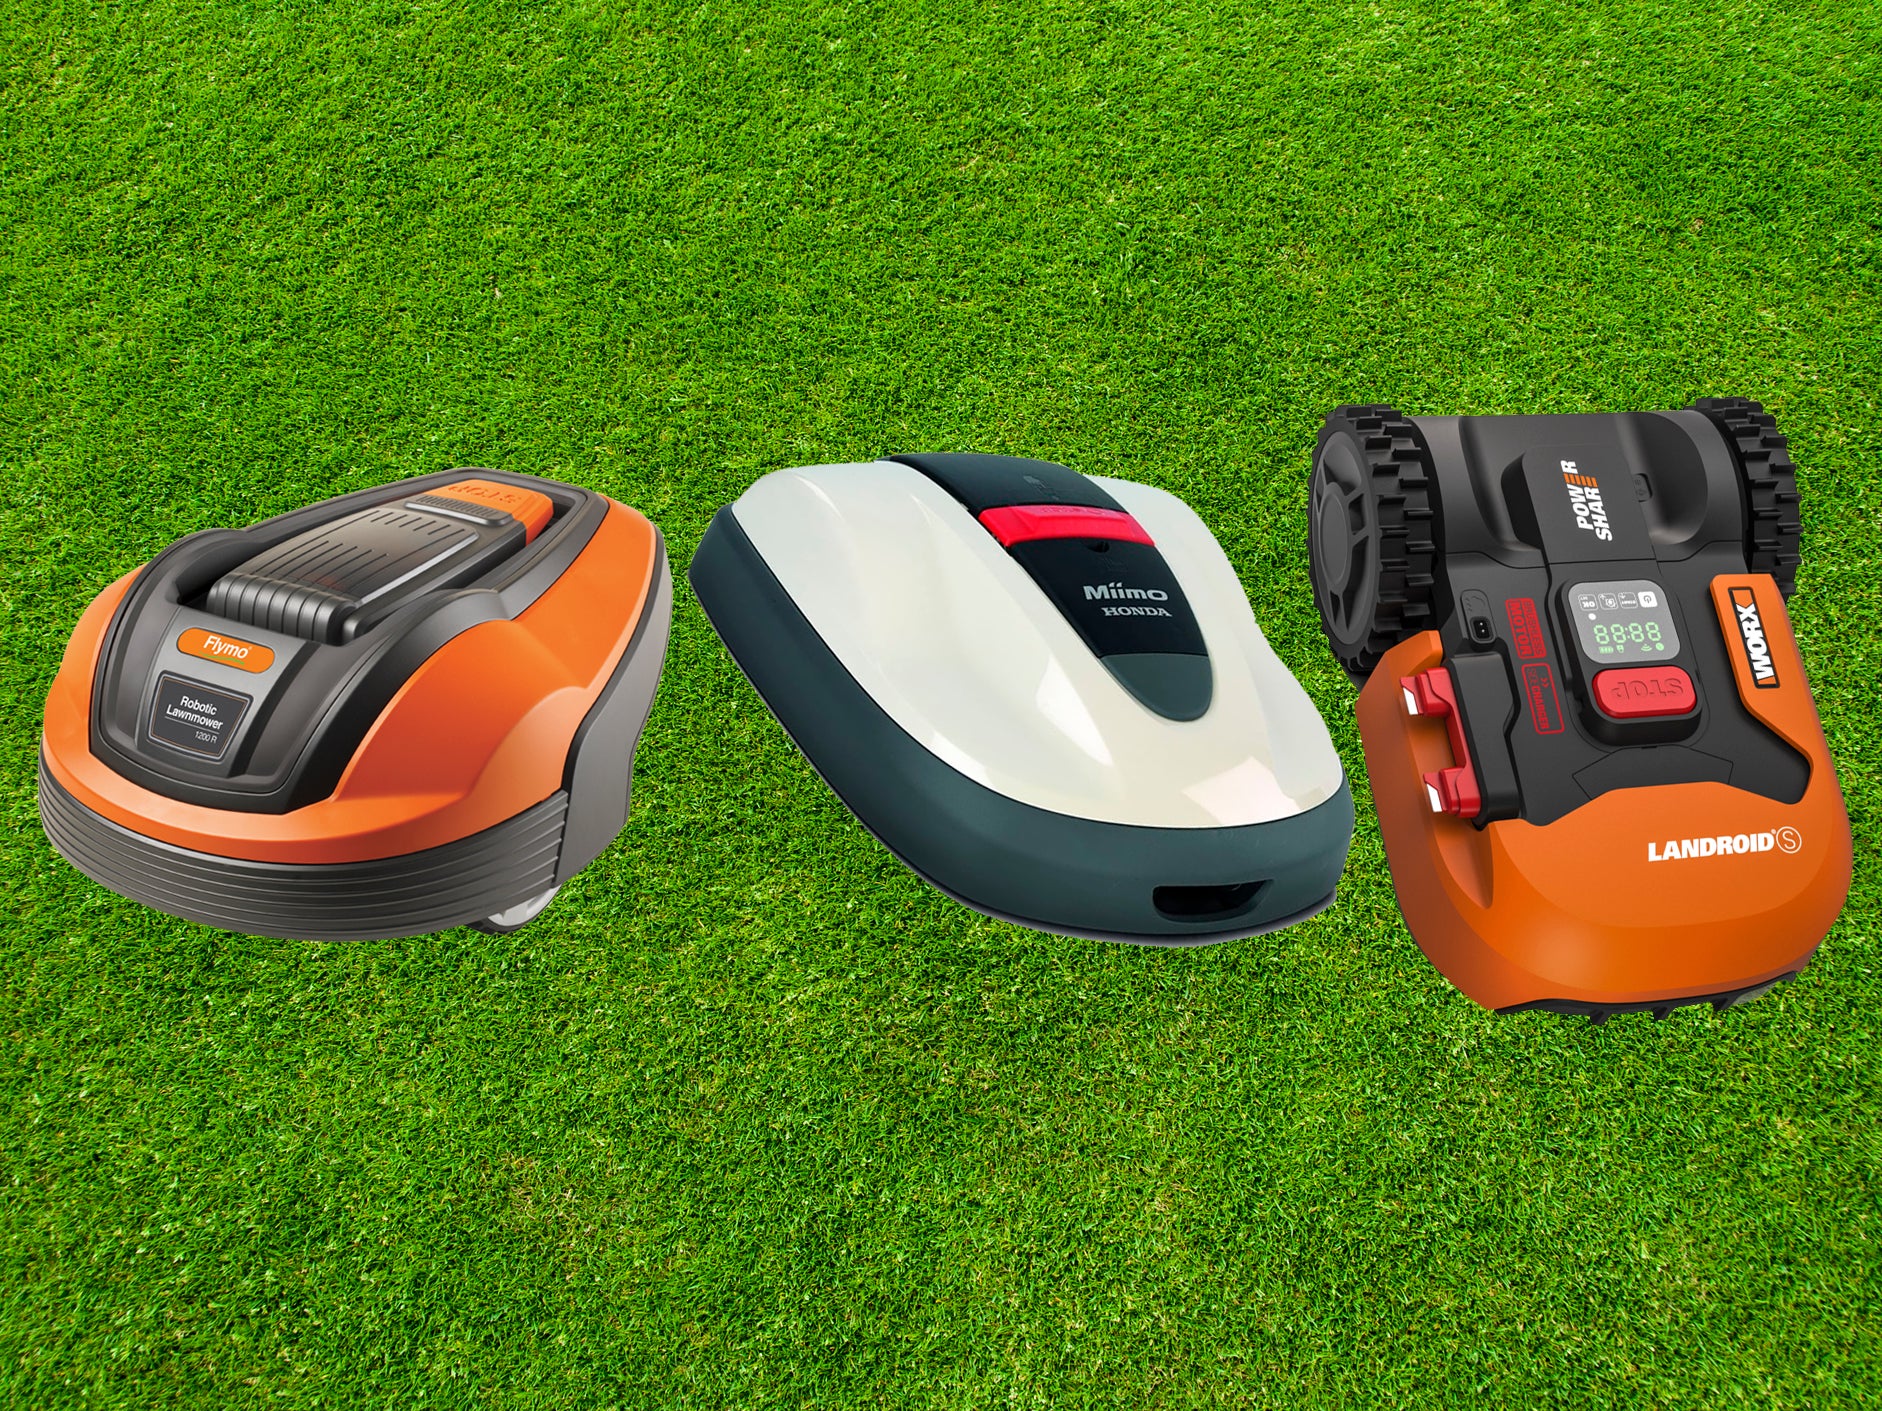 Best Robot Lawnmower That Will Take The Graft Out Of Cutting The Grass